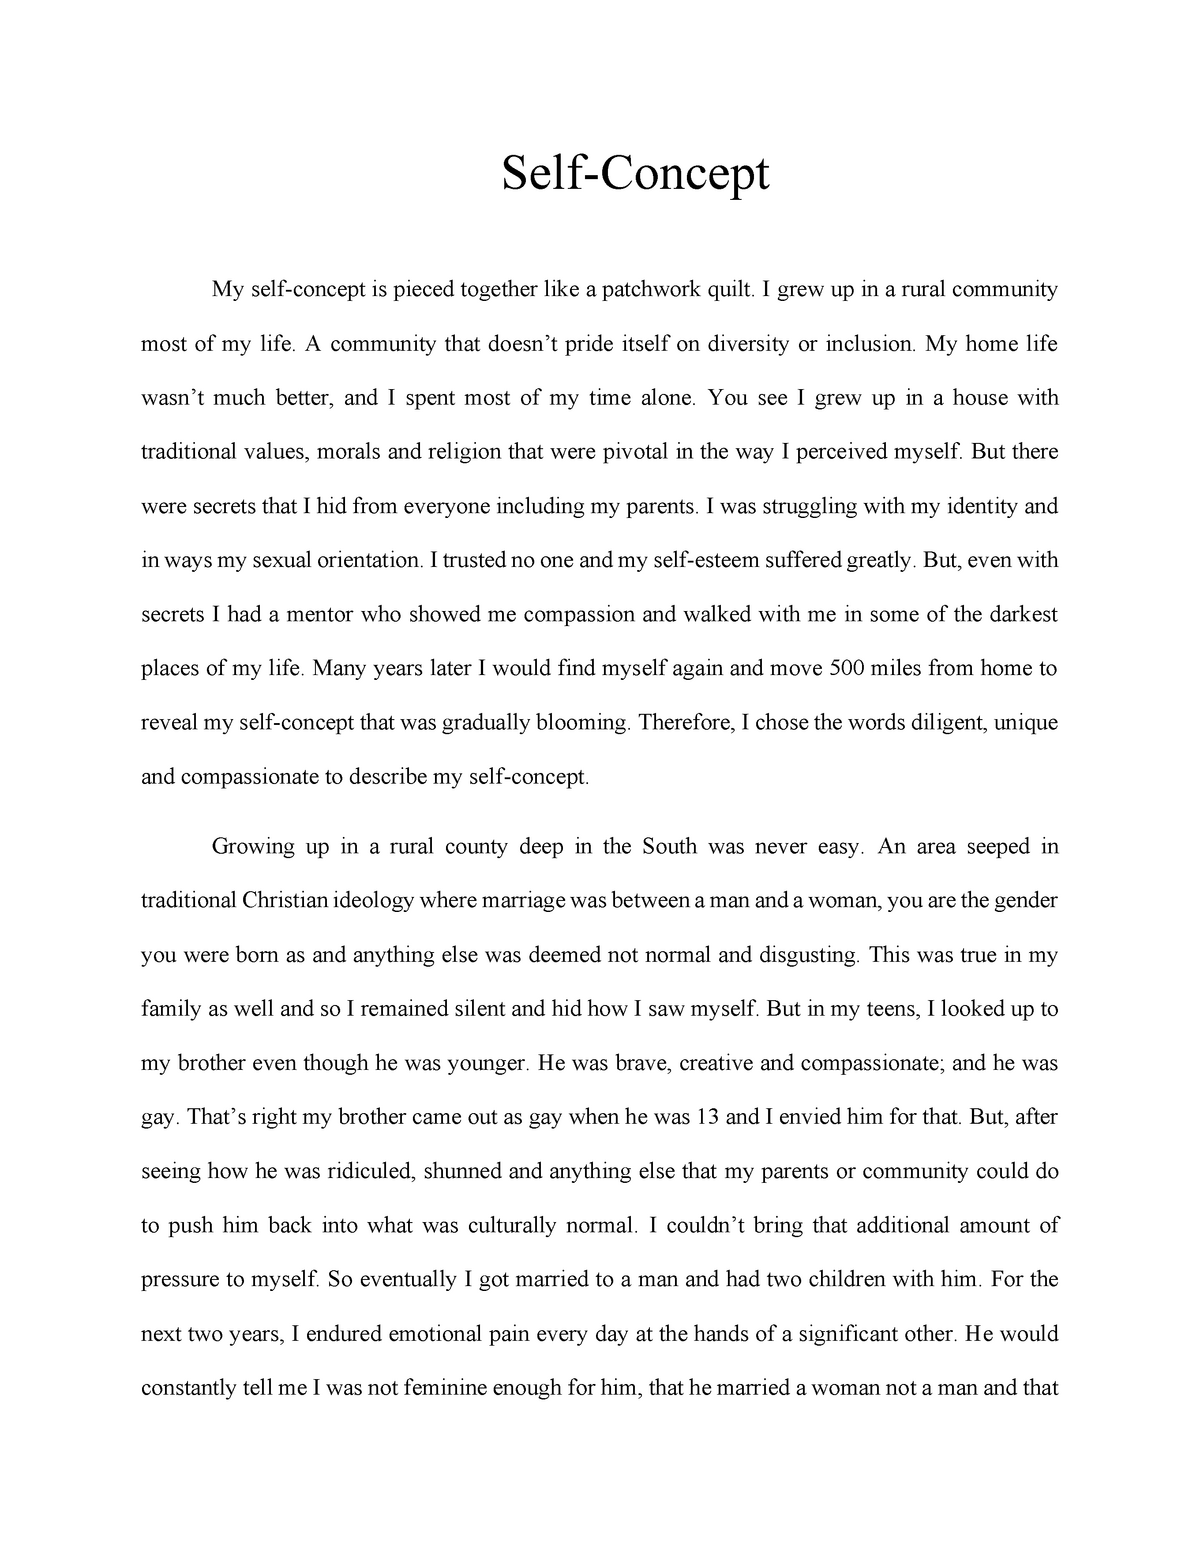 self concept and society essay